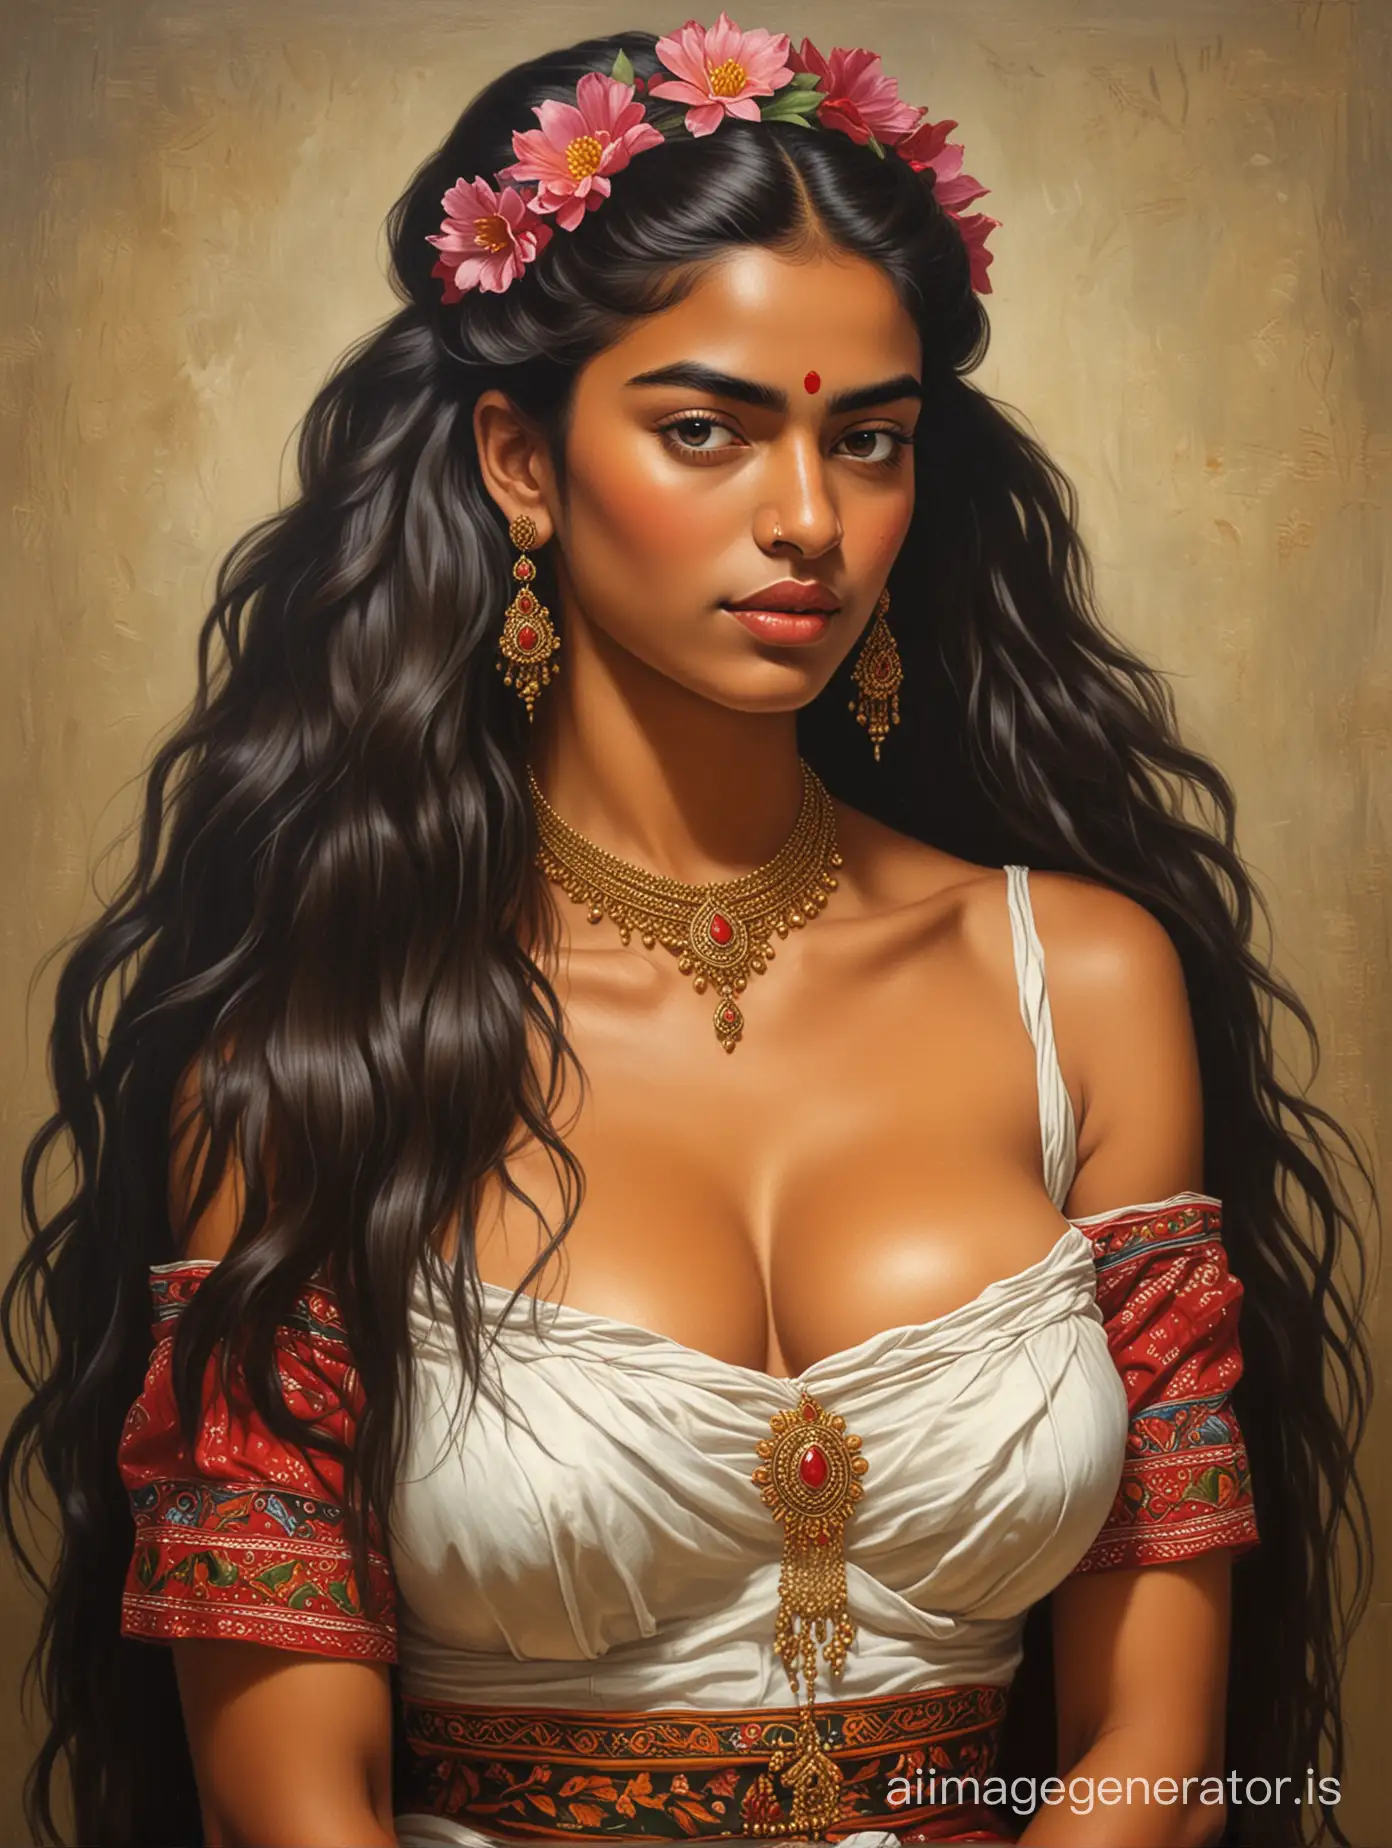 Busty-Tamil-Princess-in-KahloInspired-Oil-Painting